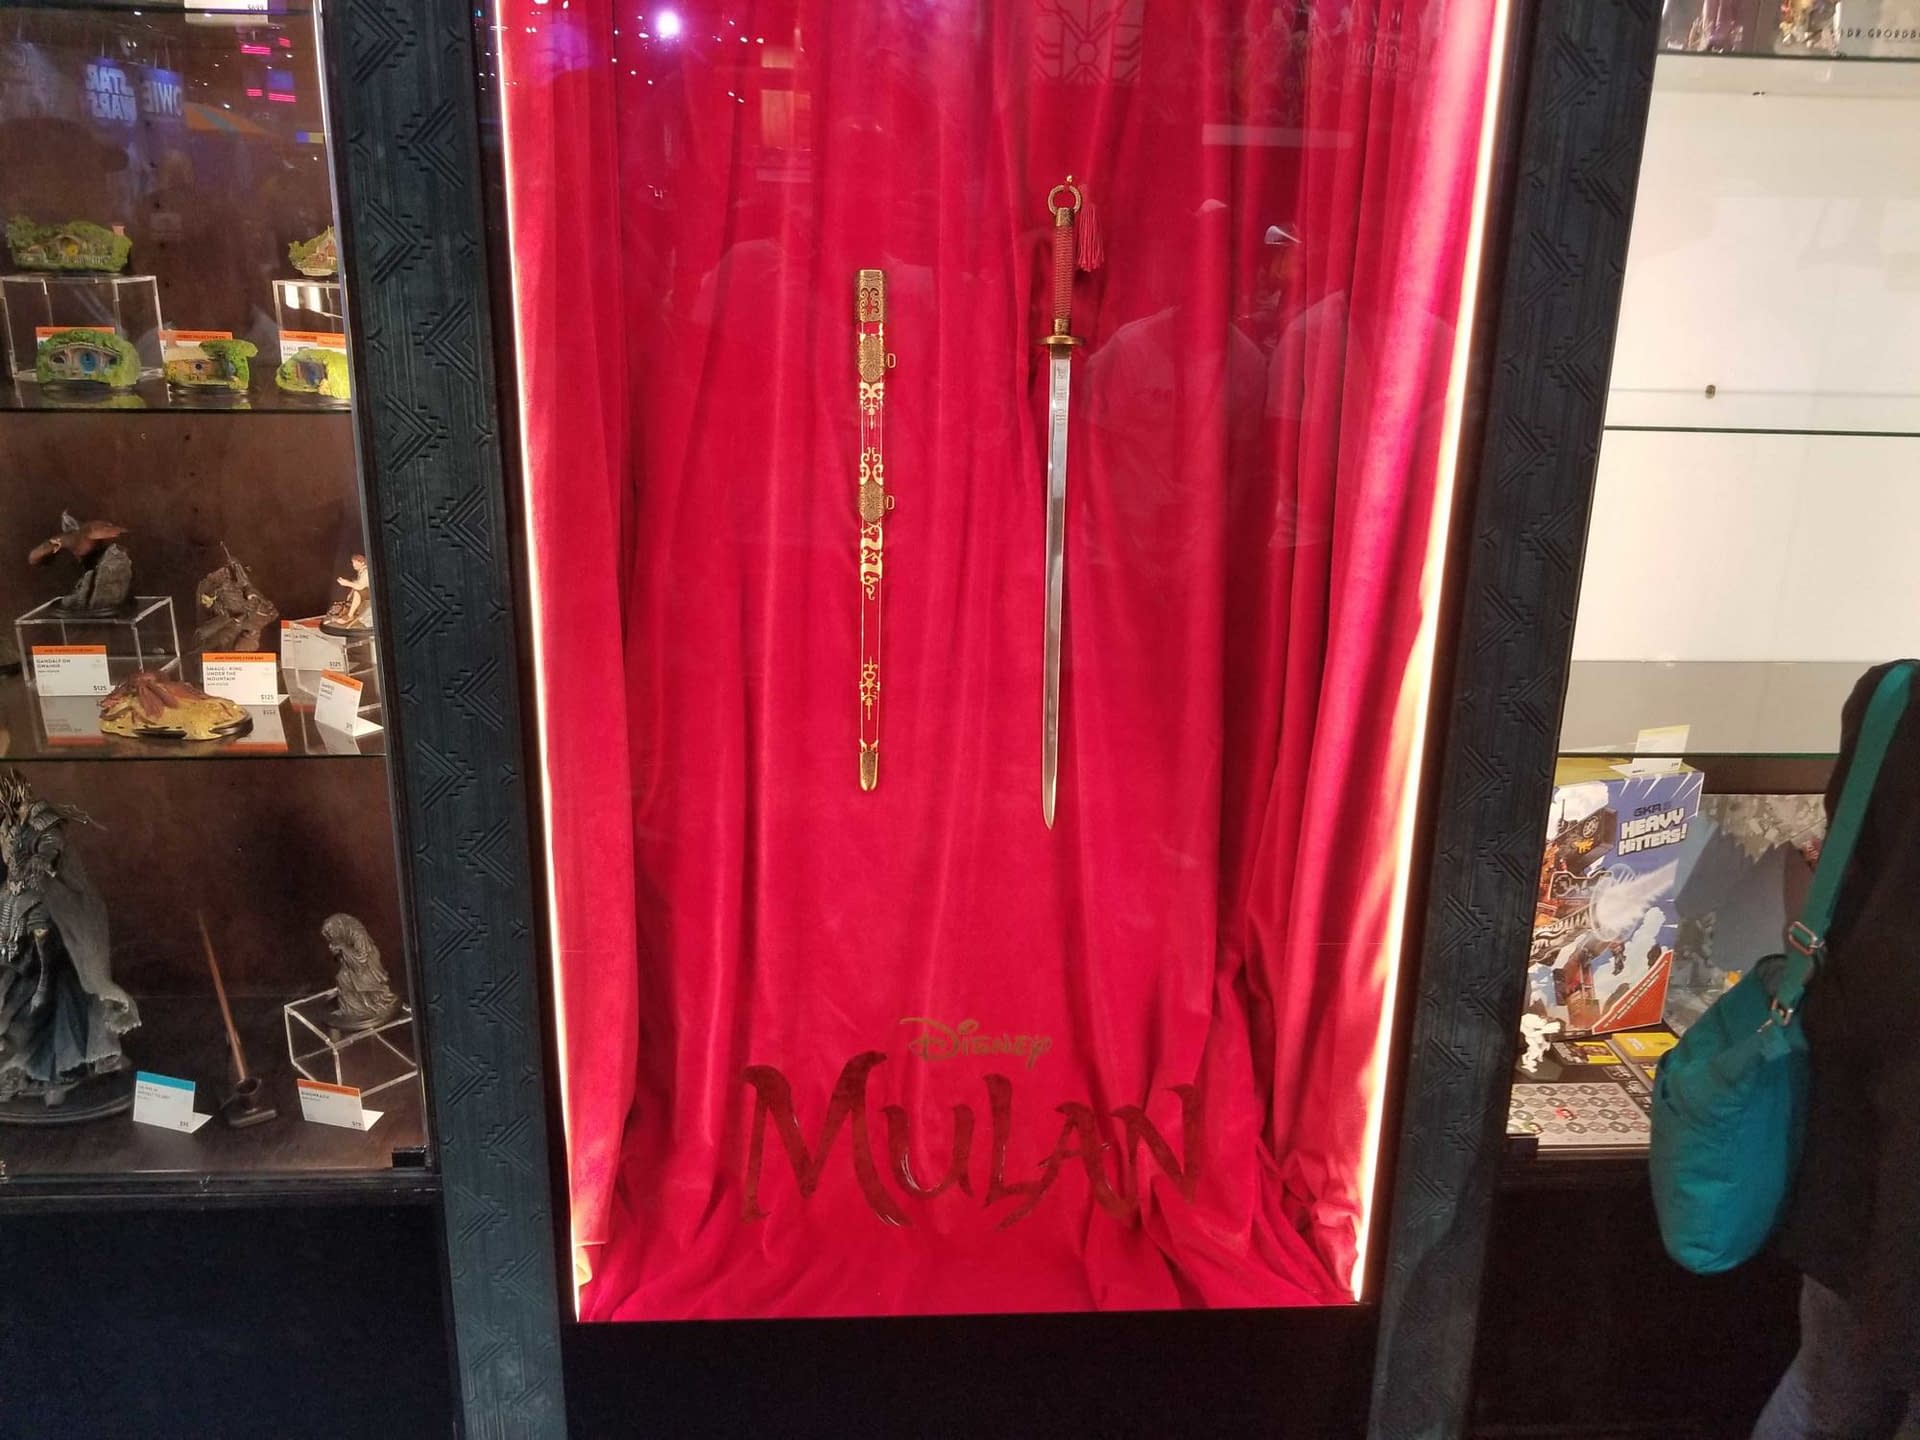 The Sword from "Mulan" is on Display at SDCC